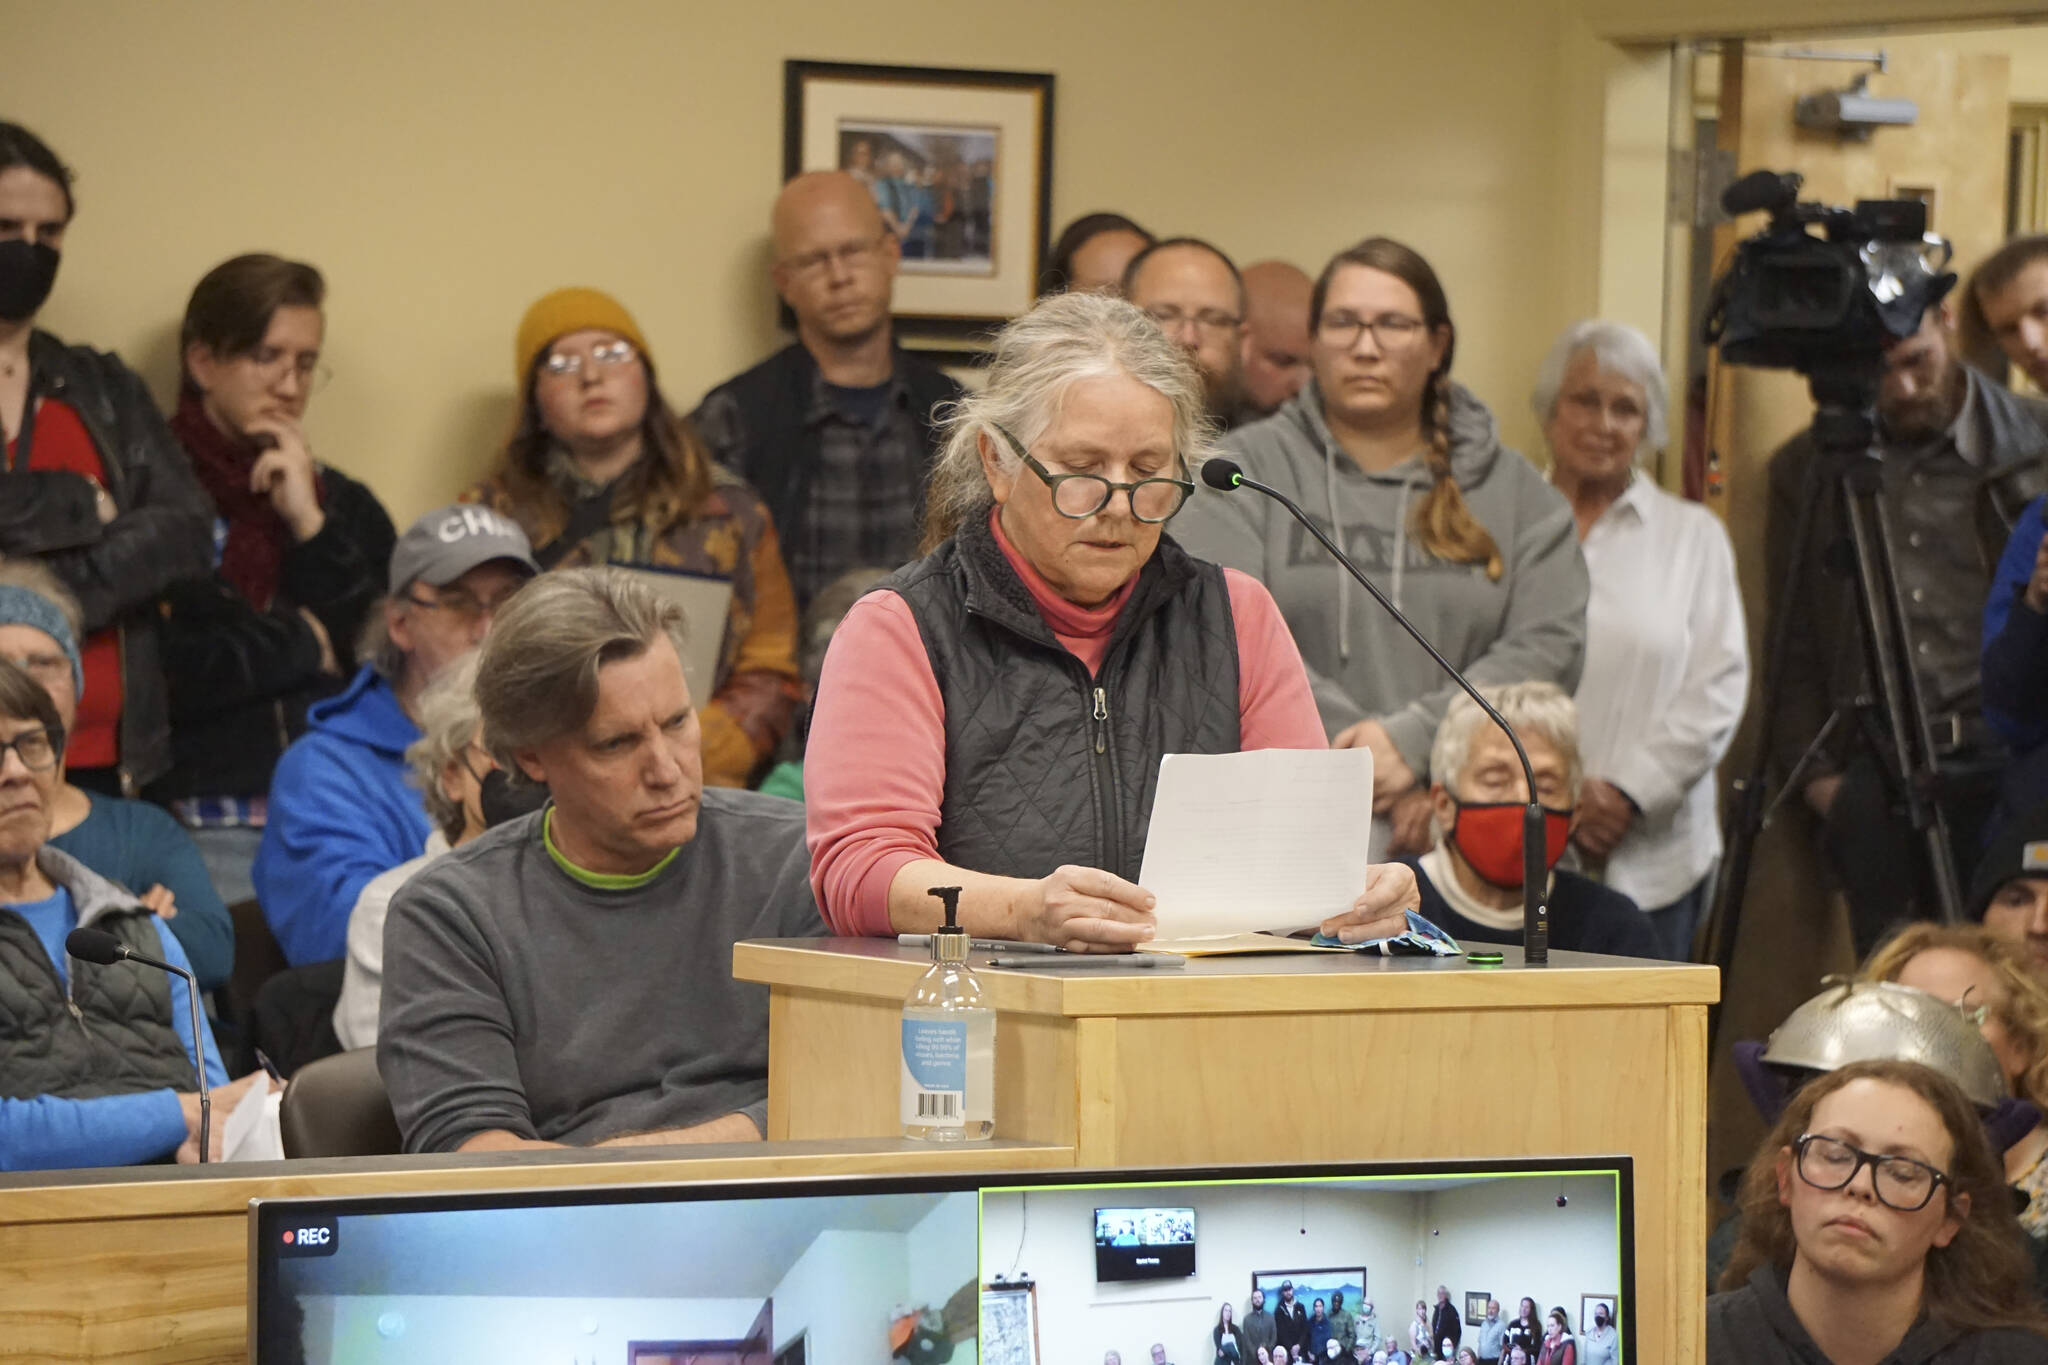 Ginny Espenshade speaks at the meeting of the Library Advisory Board on Nov. 15, 2022, in the Cowles Council Chambers at Homer City Hall in Homer, Alaska. (Photo by Michael Armstrong/Homer News)